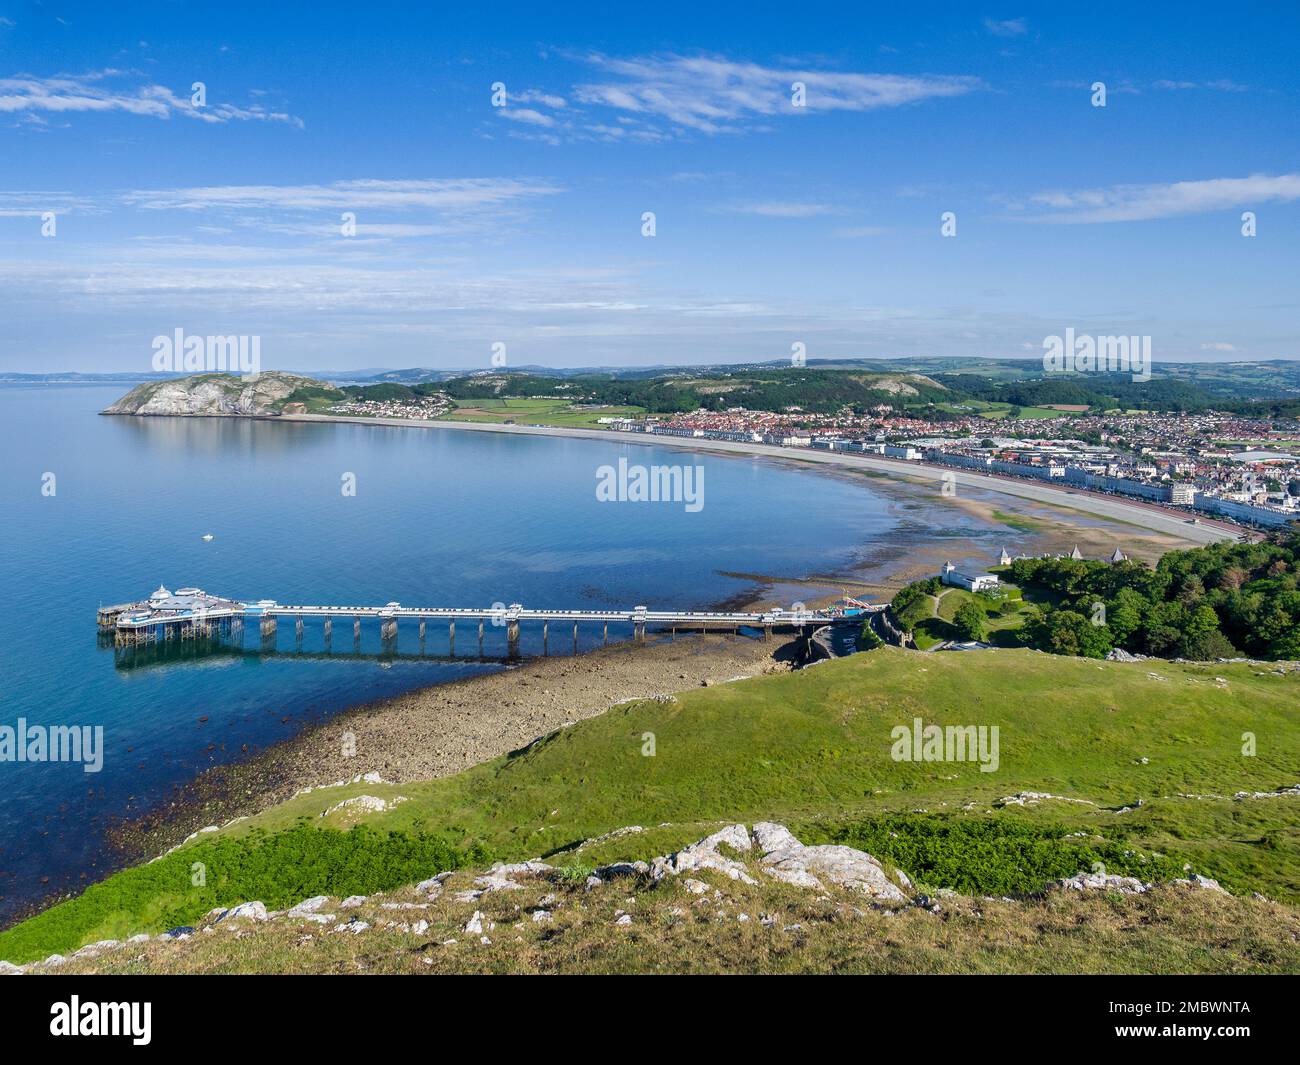 Llandudno Bay, with the Pier and Little Orme's Head, from Great Orme's Head. Stock Photo